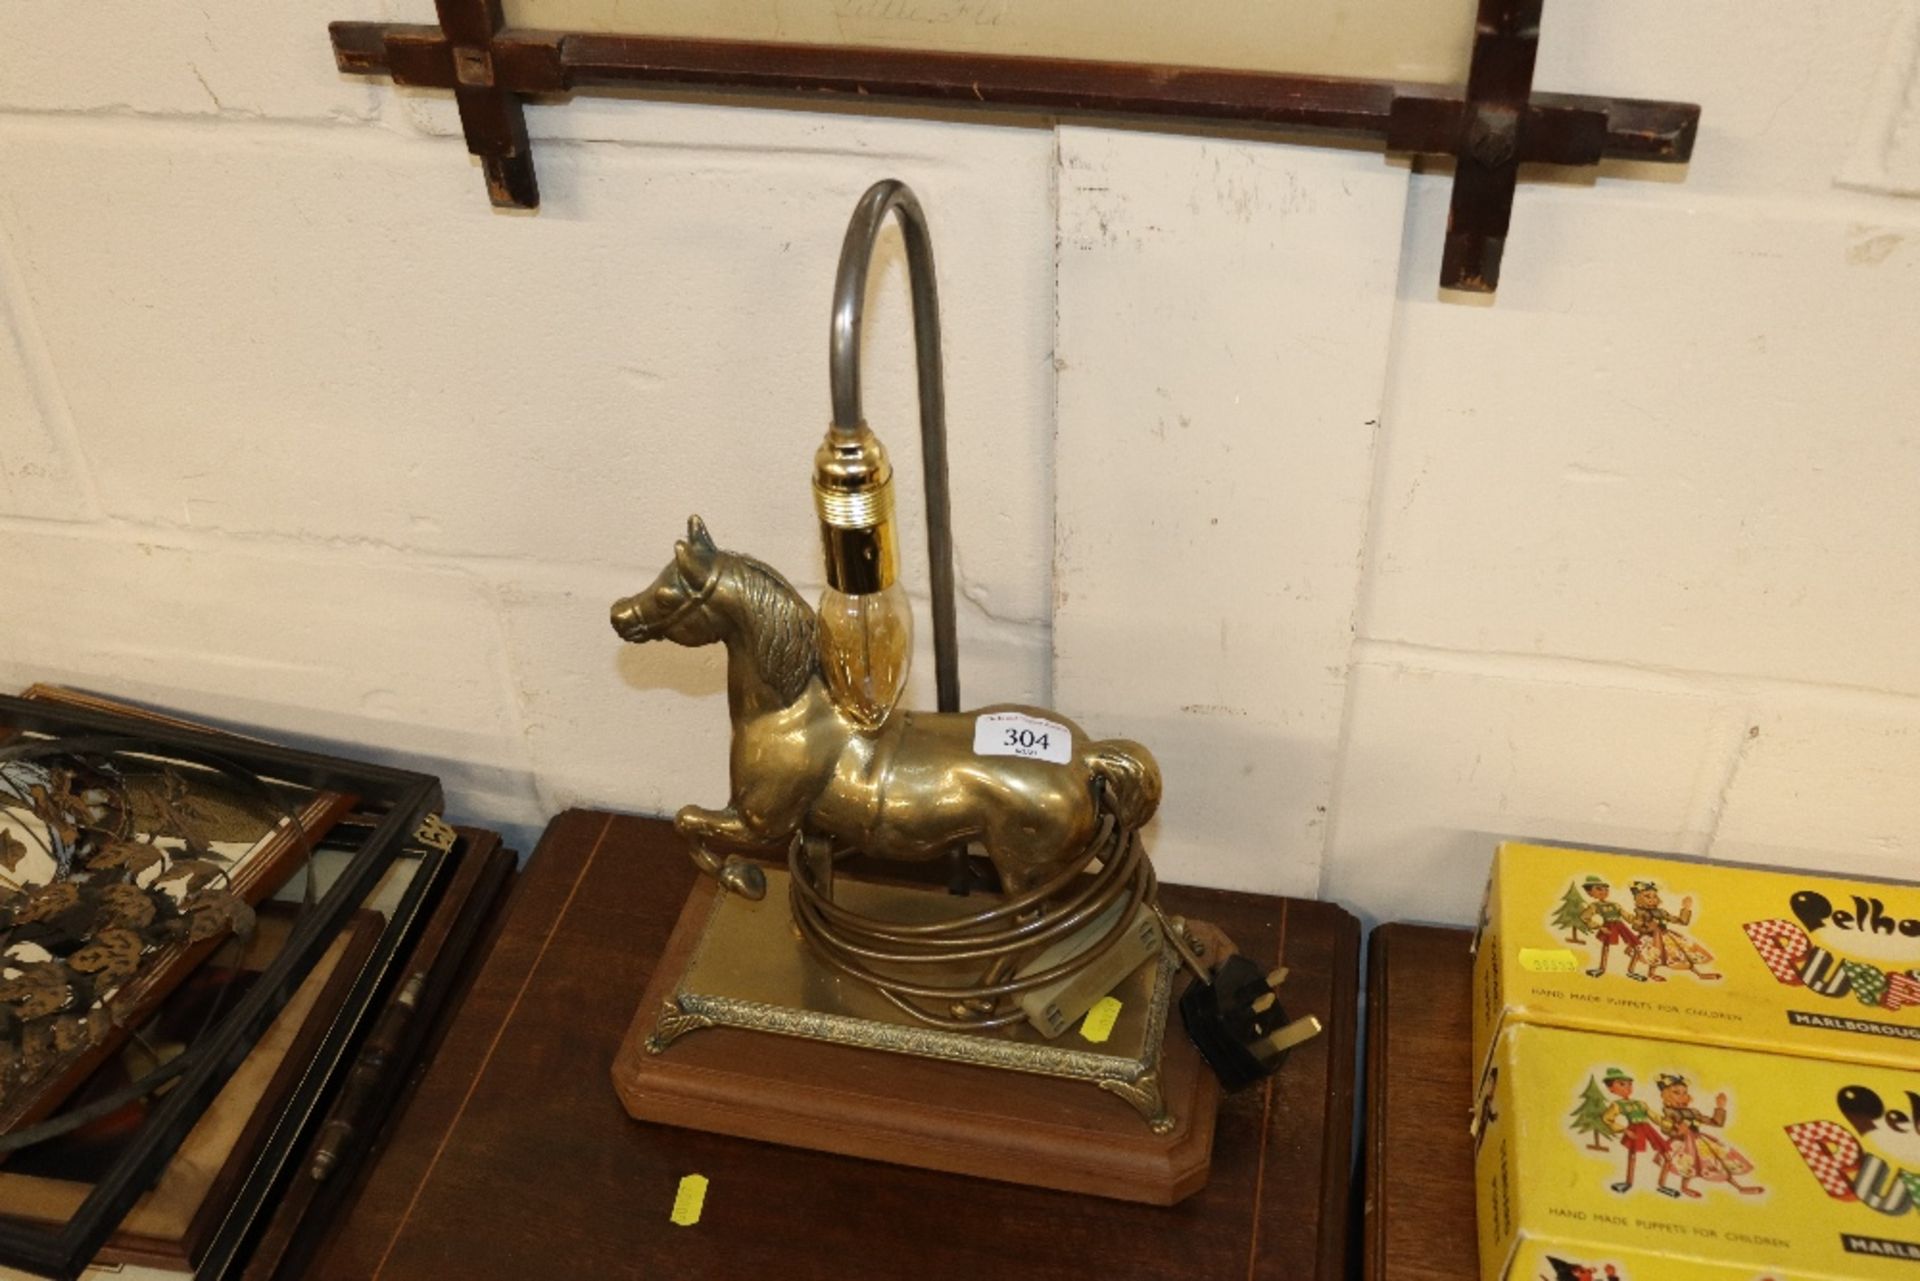 A brass table lamp decorated with horse